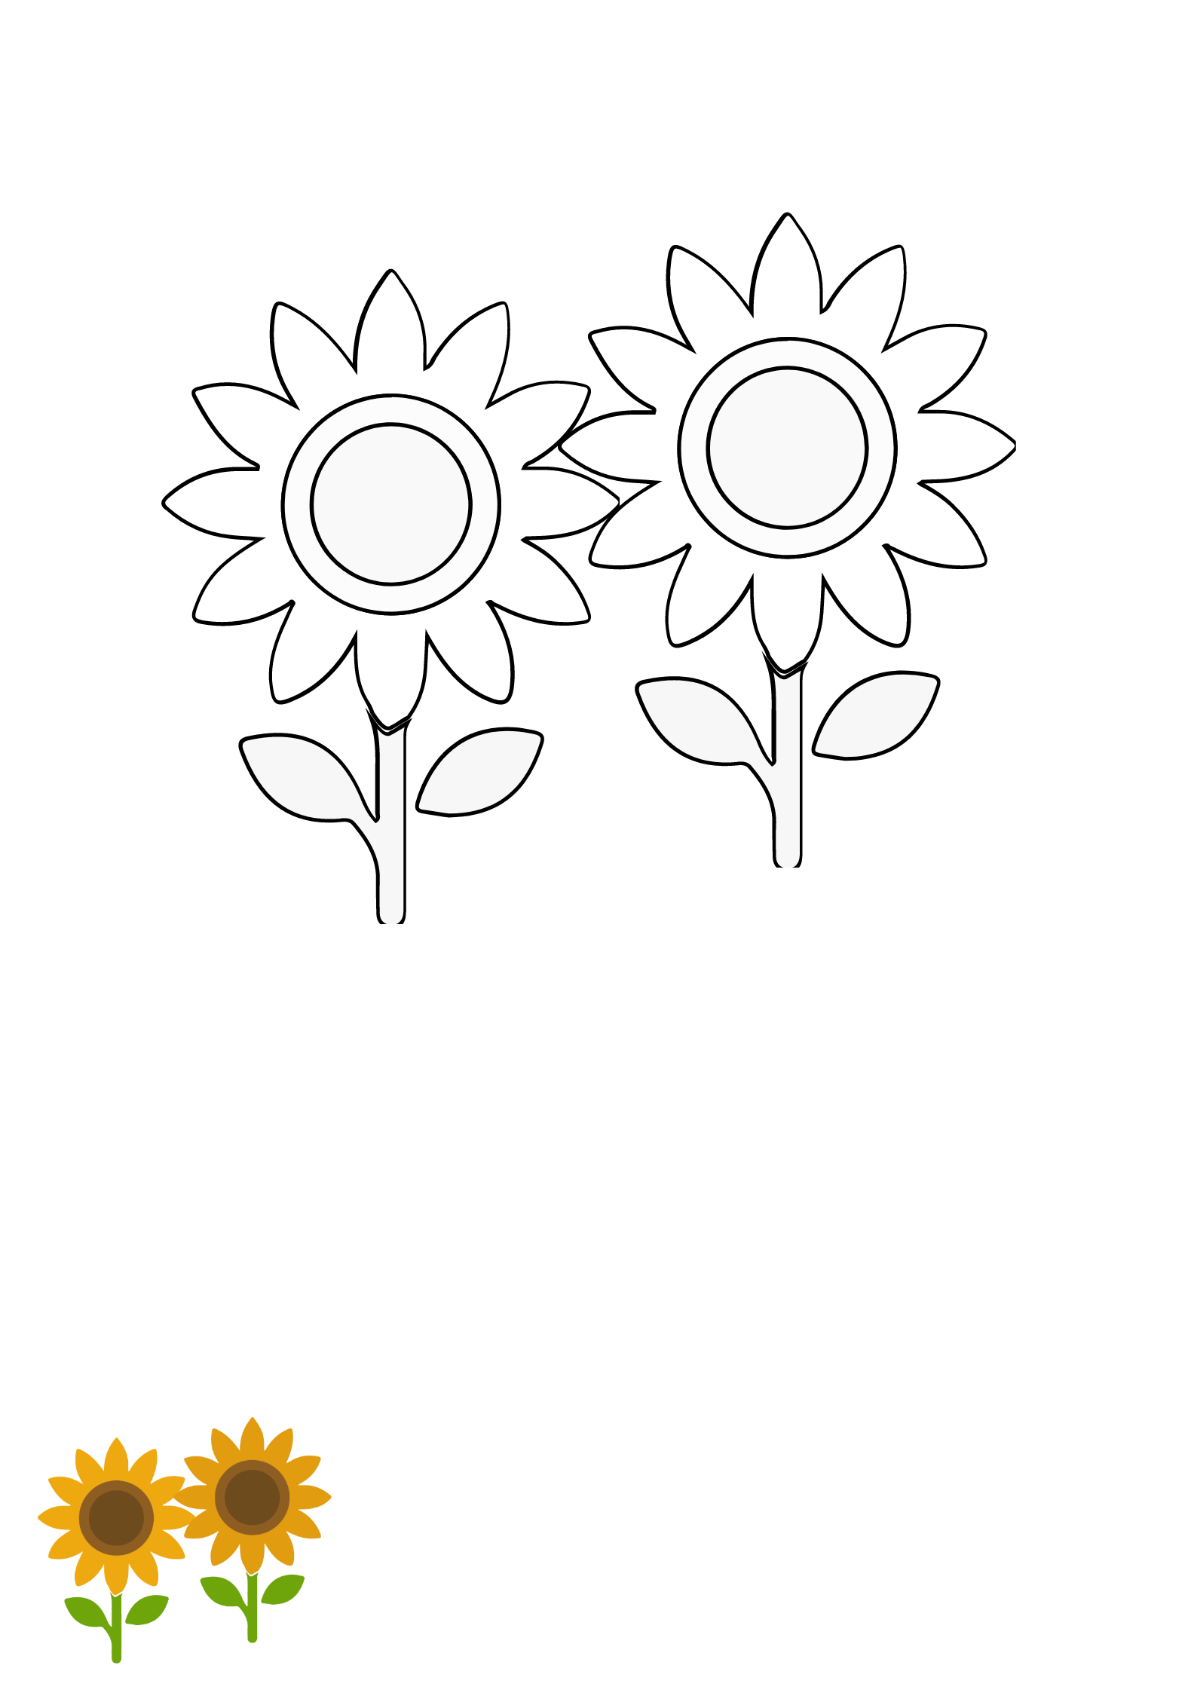 Sunflowers Coloring Page Template